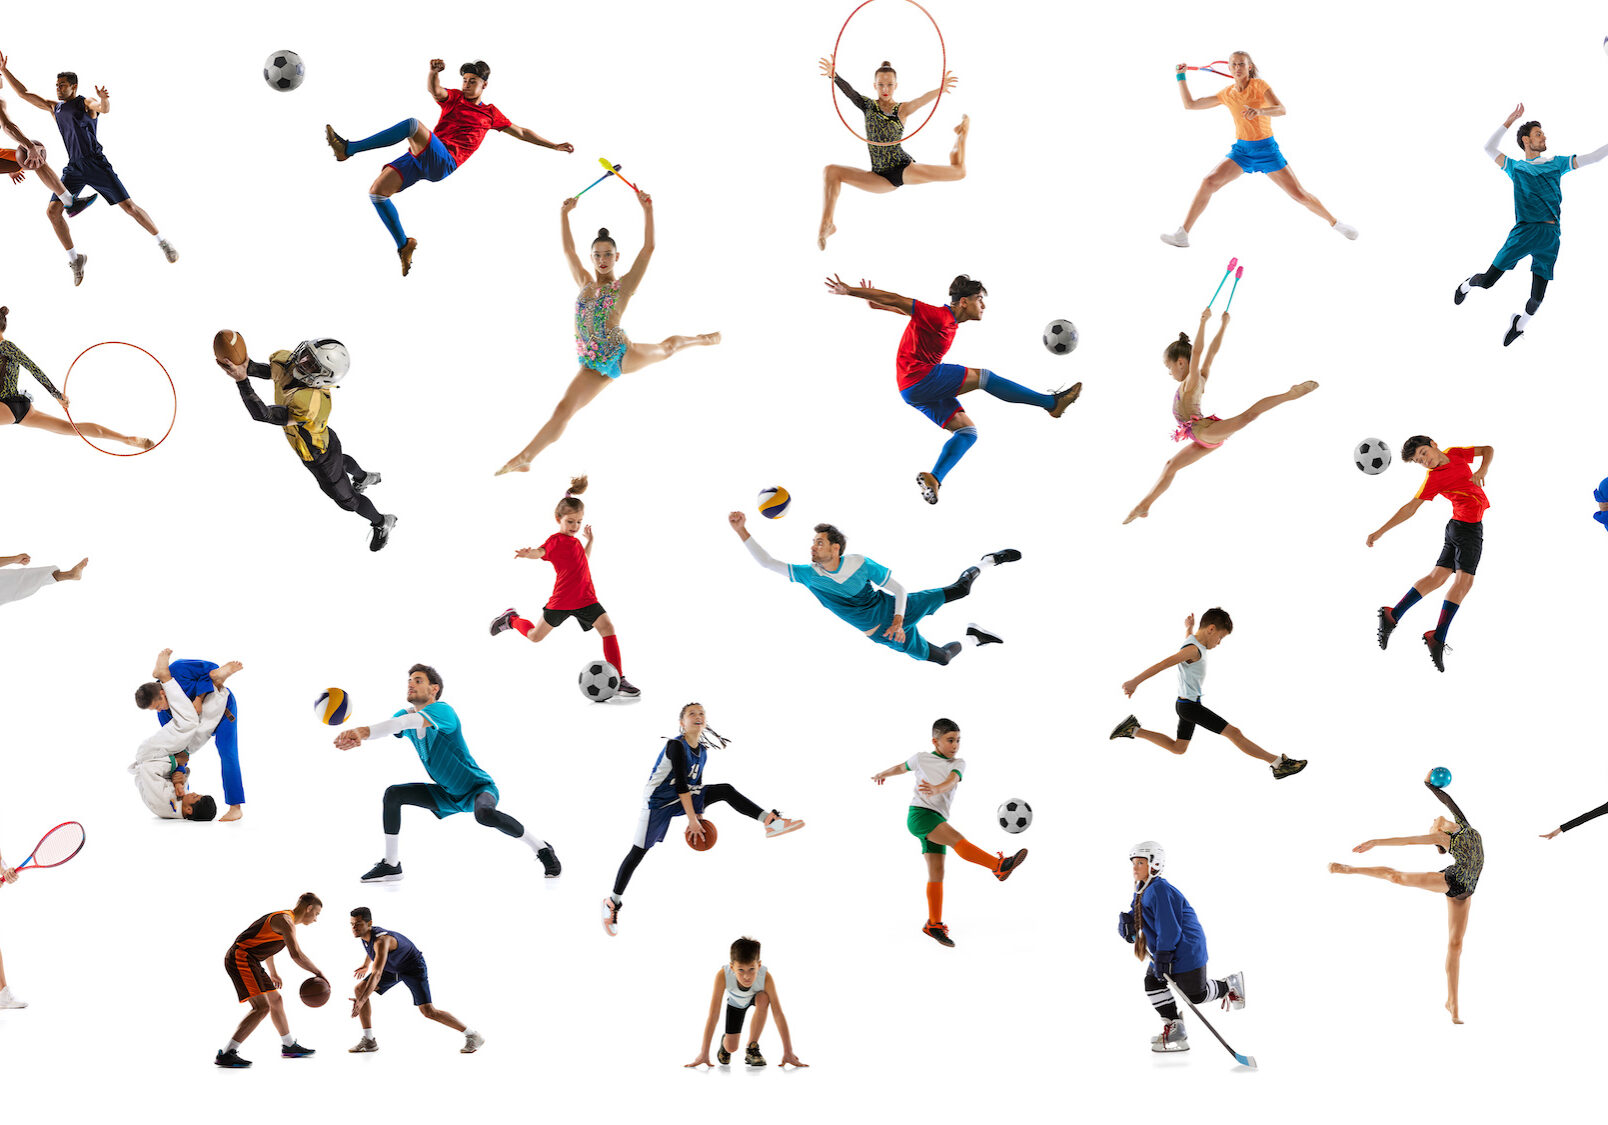 Collage of sportive people, adults and children doing different sports, posing isolated over white background. Concept of action, motion, sport life, motivation, competition. Copy space for ad.